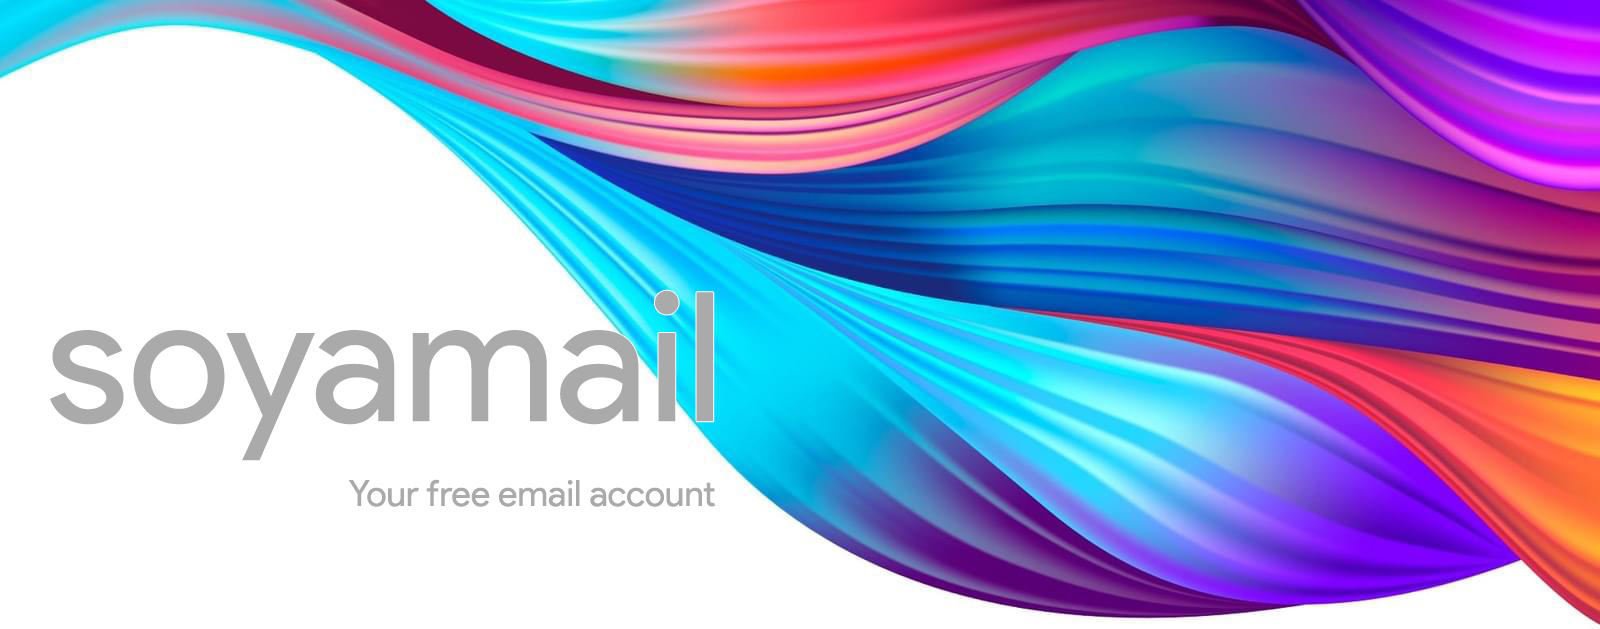 Free email account | SoyaMail.com